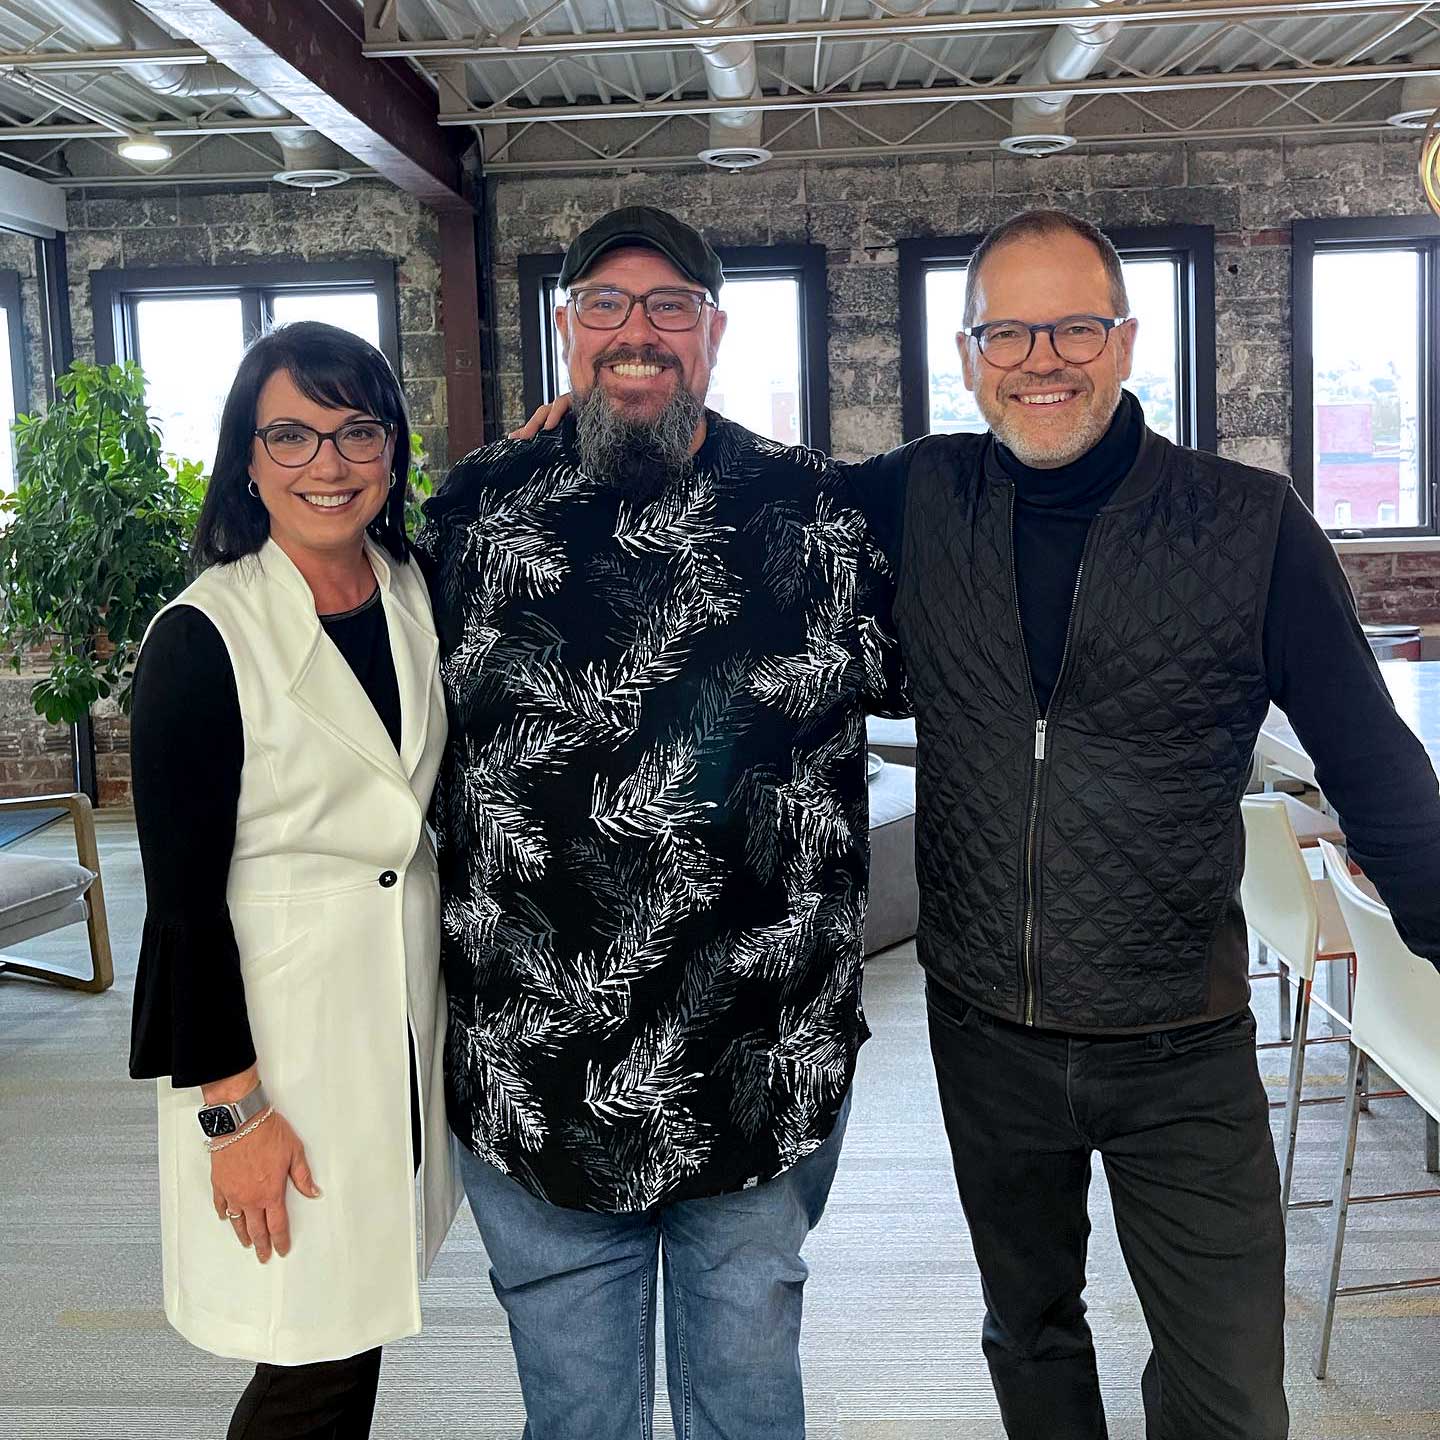 Sharon City Eyeworks Welcomes Big Daddy Weave